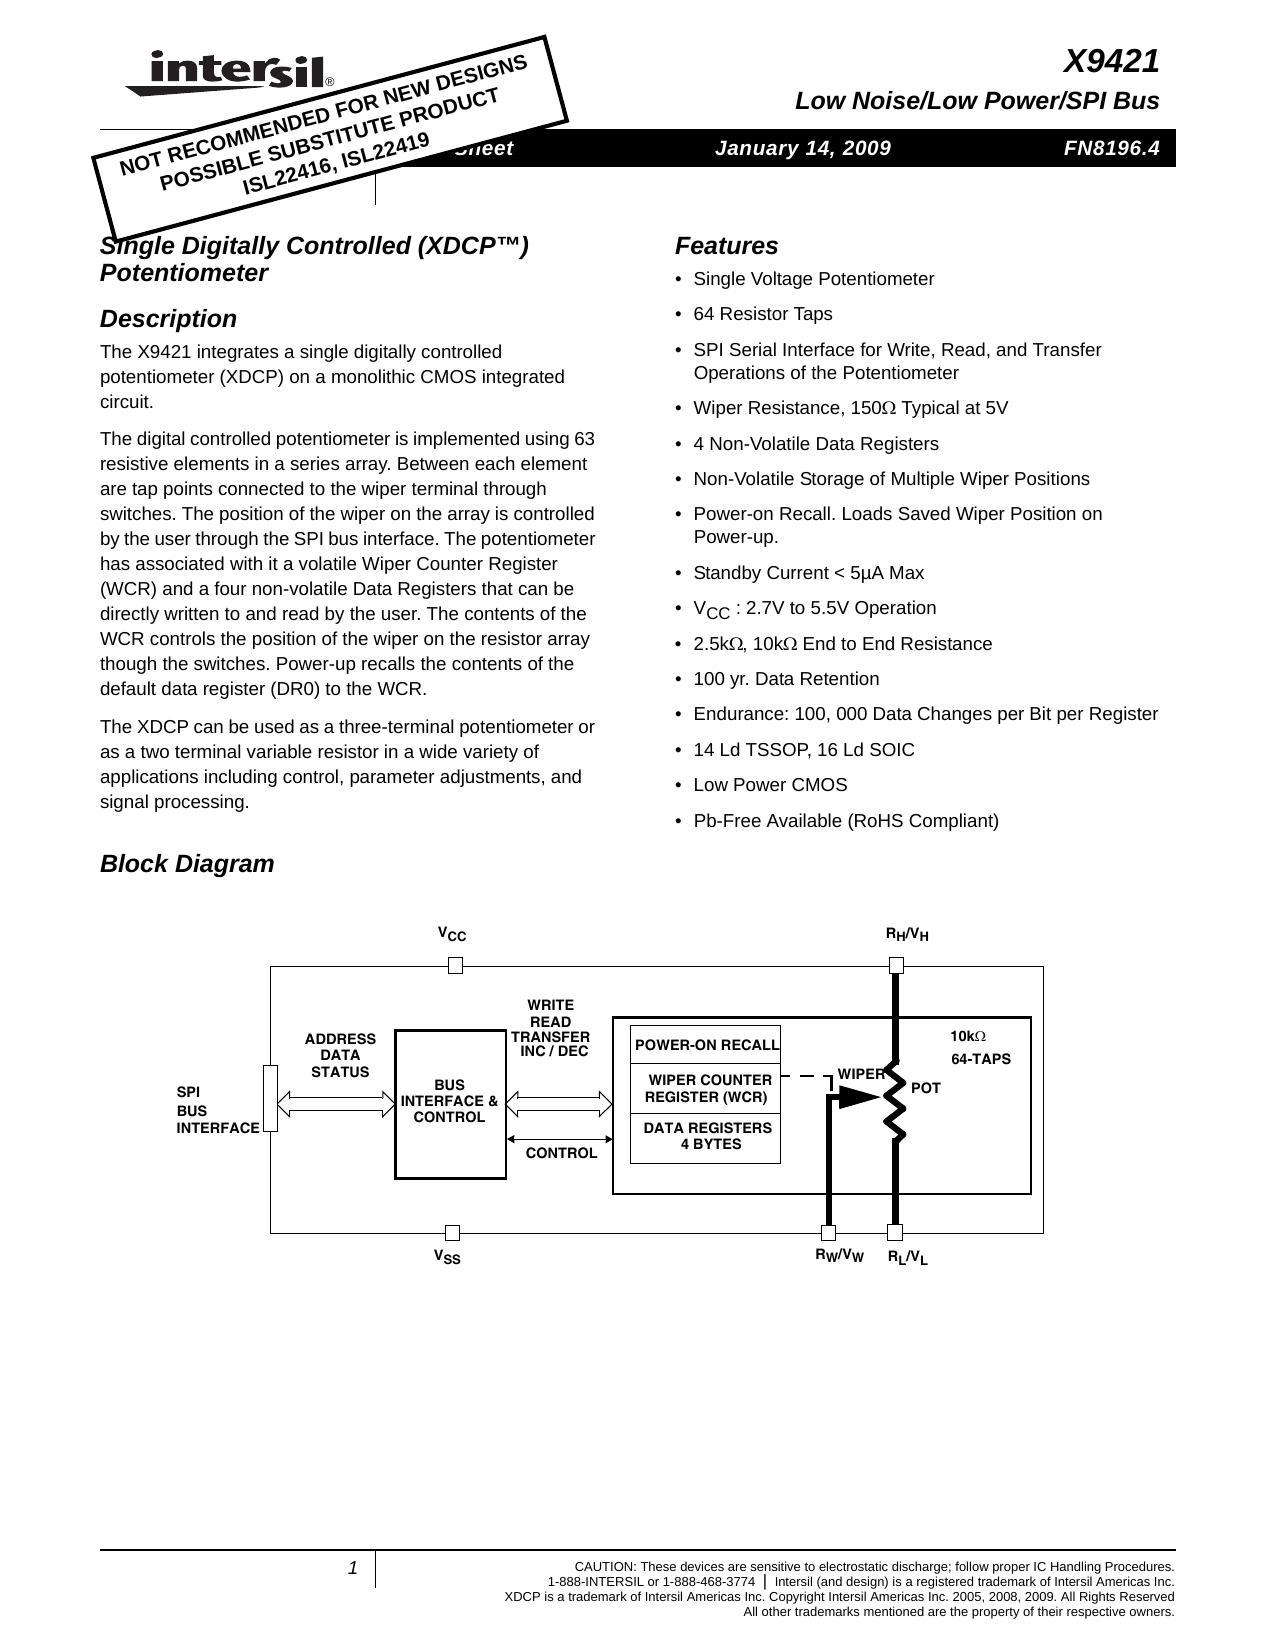 x9421-low-noise-low-power-ispi-bus-single-digitally-controlled-xdcp-potentiometer.pdf